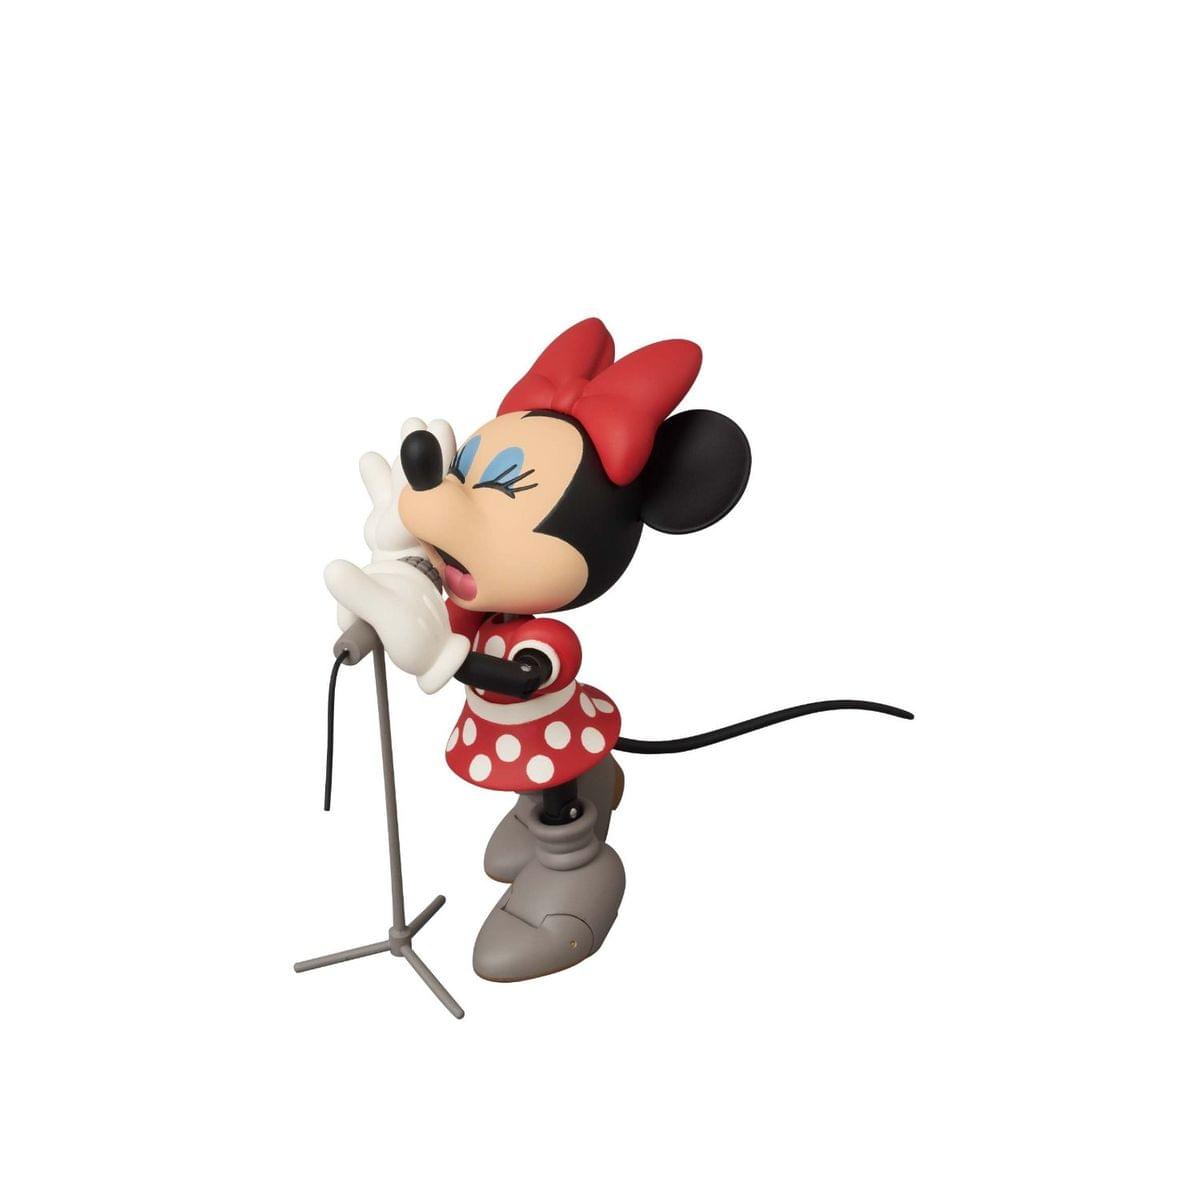 Disney X Roen Minnie Mouse Miracle Action Figure